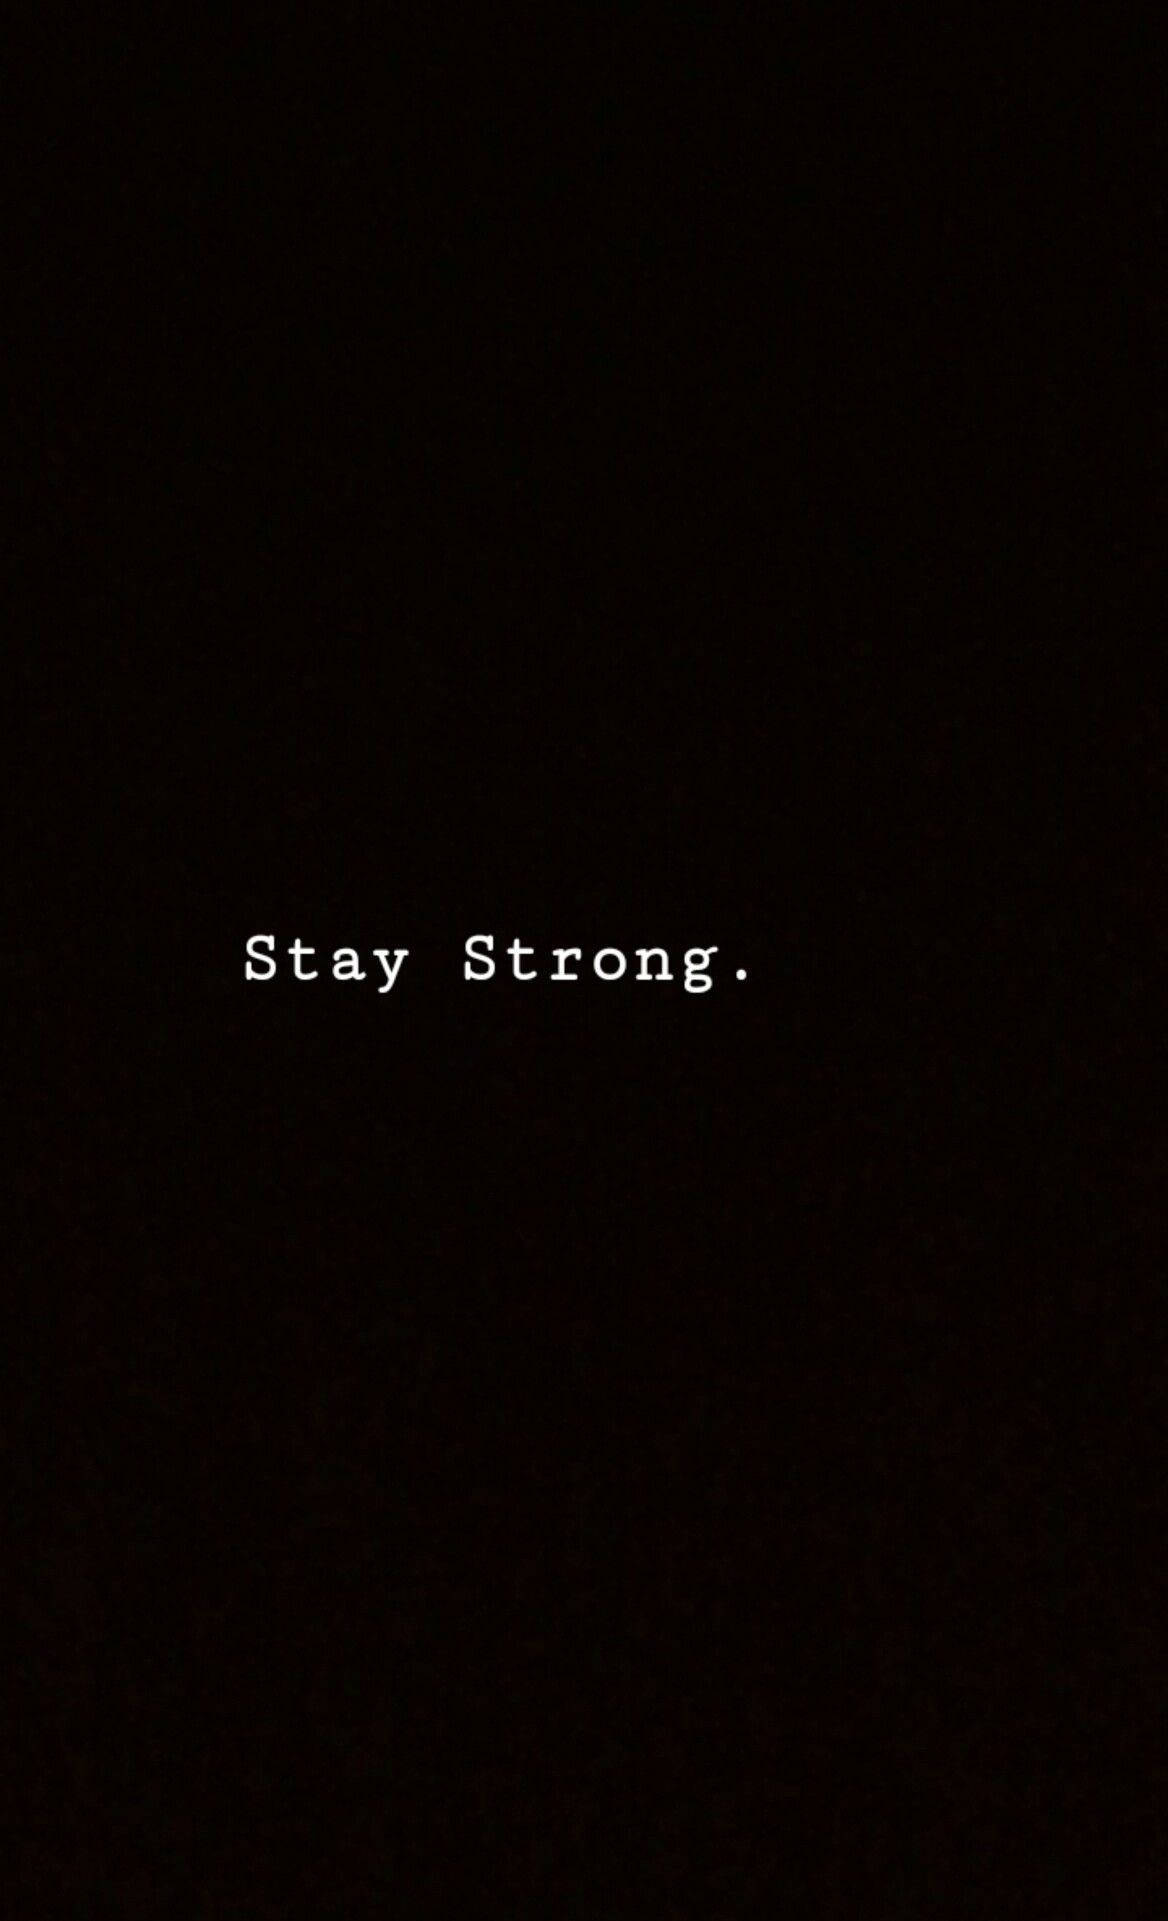 Stay Strong wallpaper for iPhone and Android - Depressing